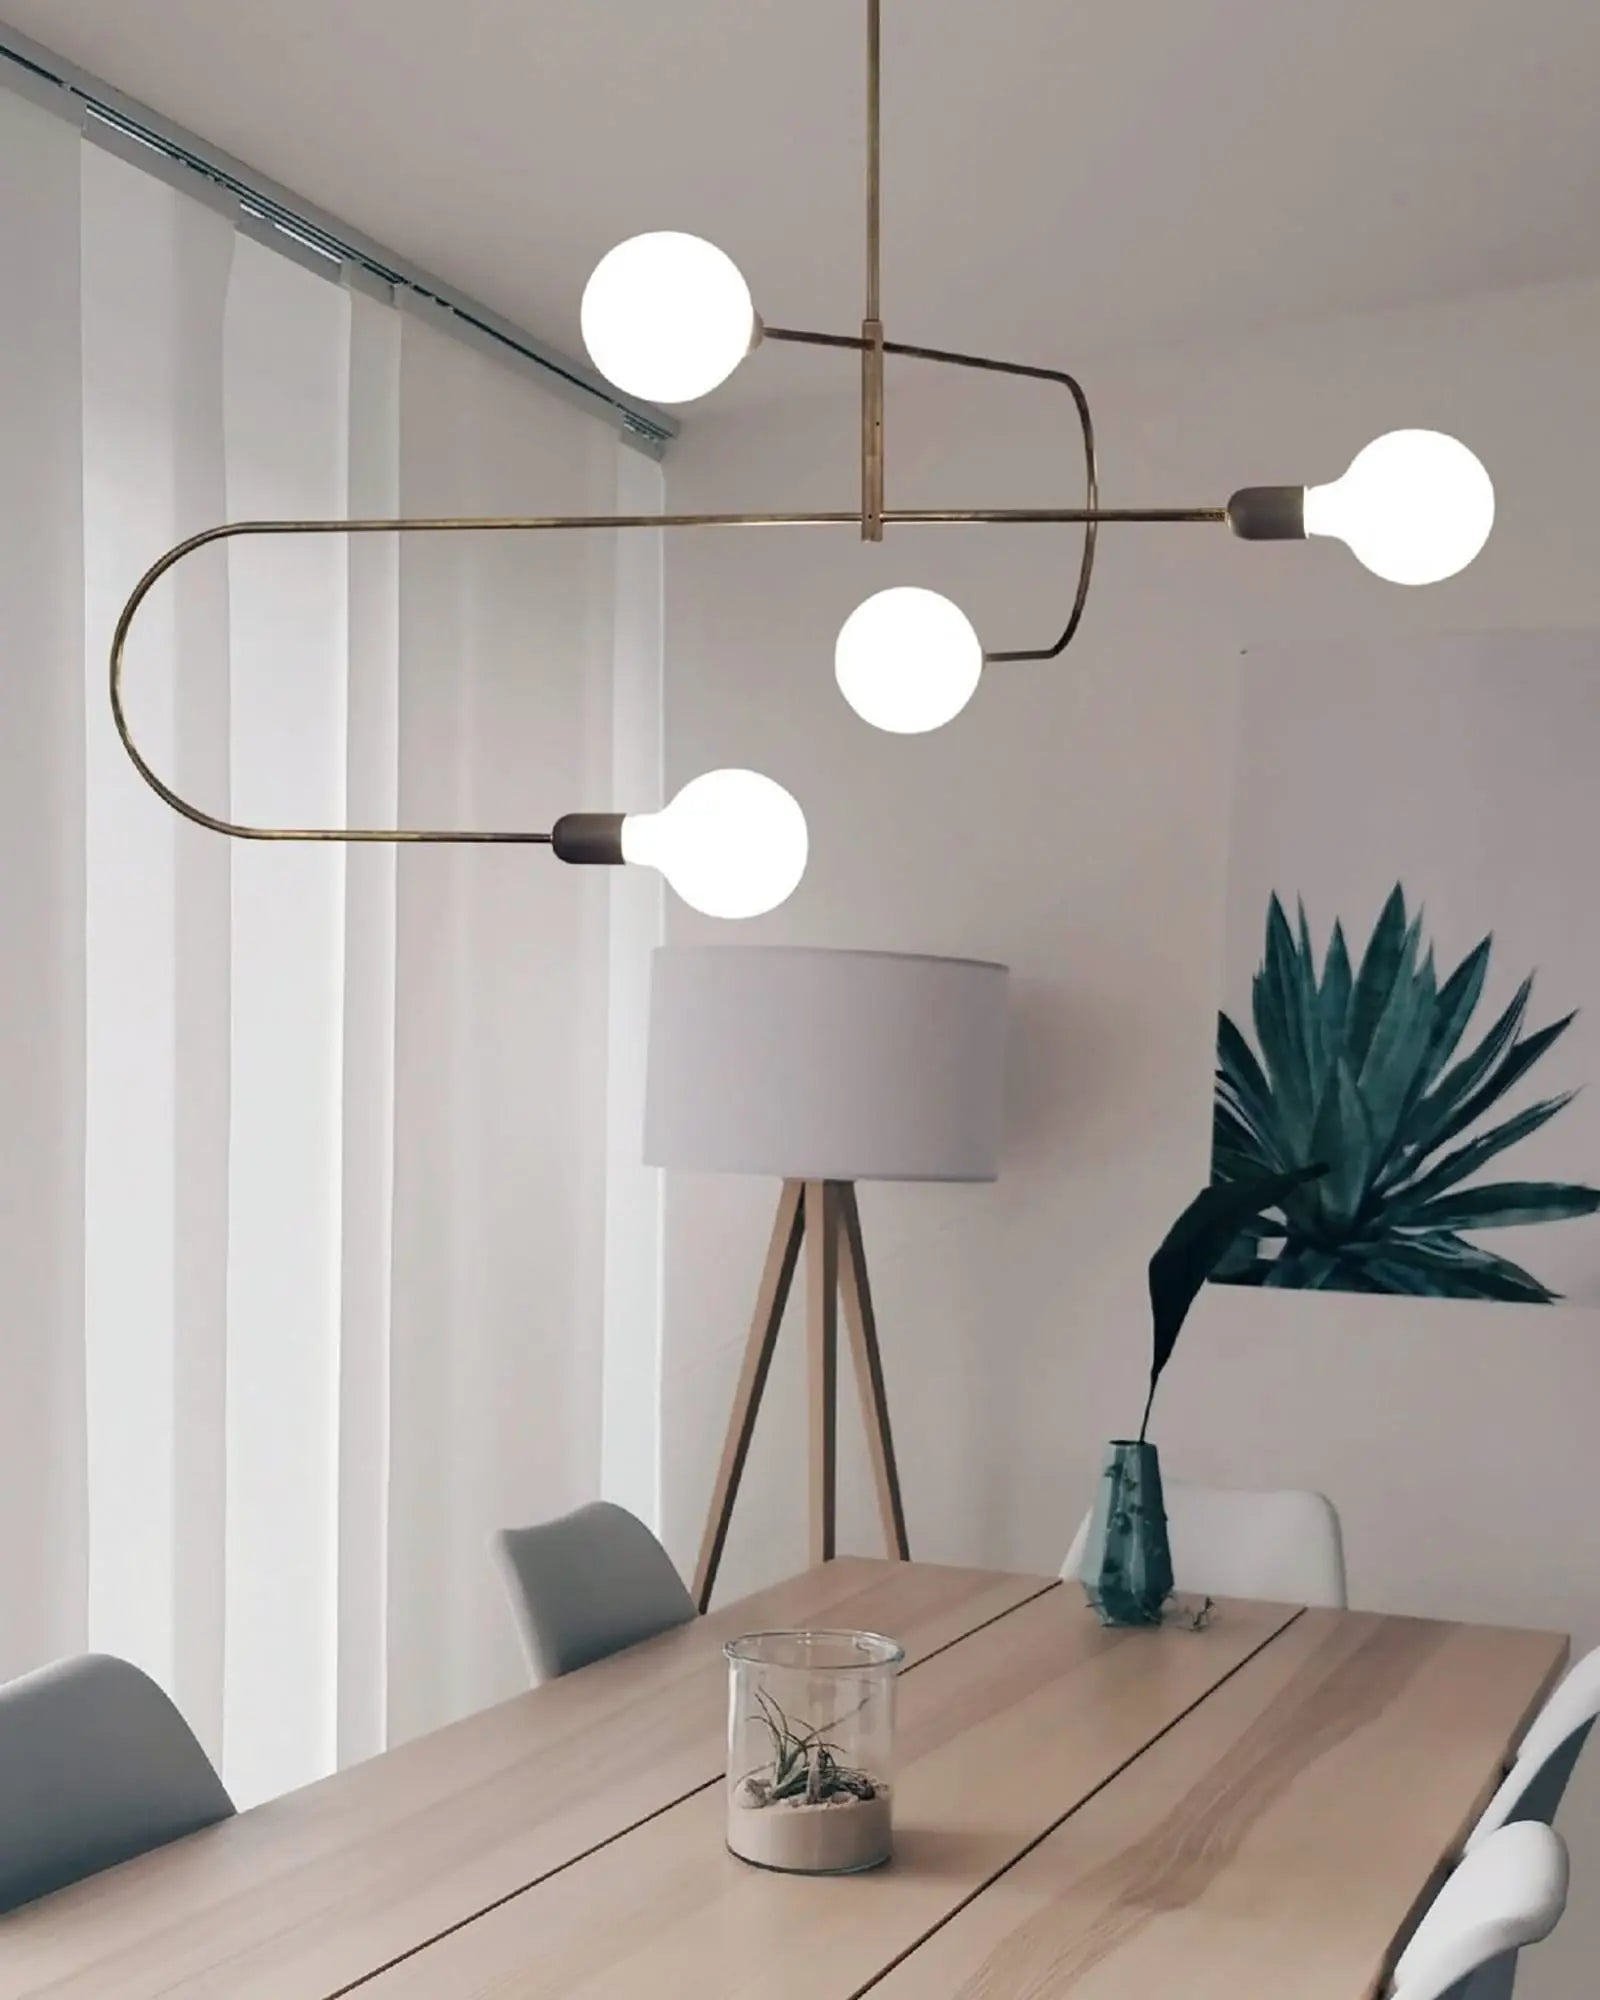 Smith 4 pendant light above table